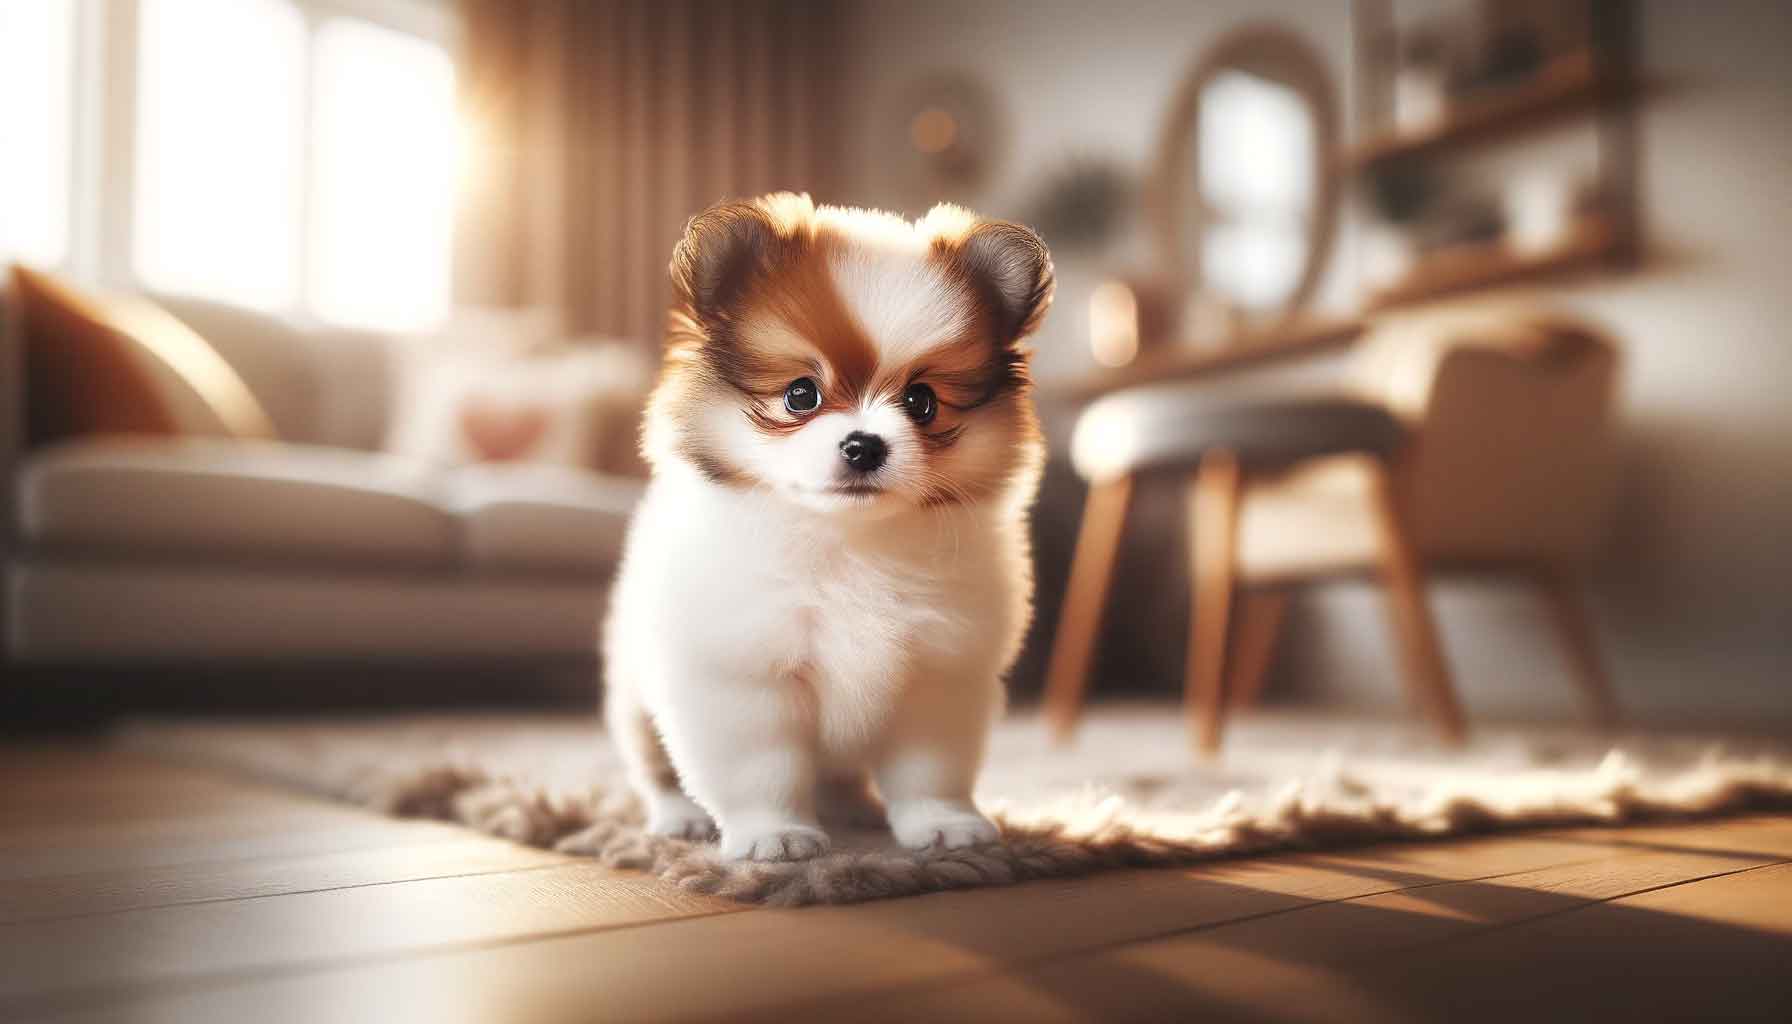 A photograph of a Pomeranian Micro Bully mix puppy, small in stature with a larger head, featuring a short, thick double-layered white coat with brown patches. The puppy appears playful and curious in a cozy apartment setting, with soft natural light enhancing the unique colors of its coat.